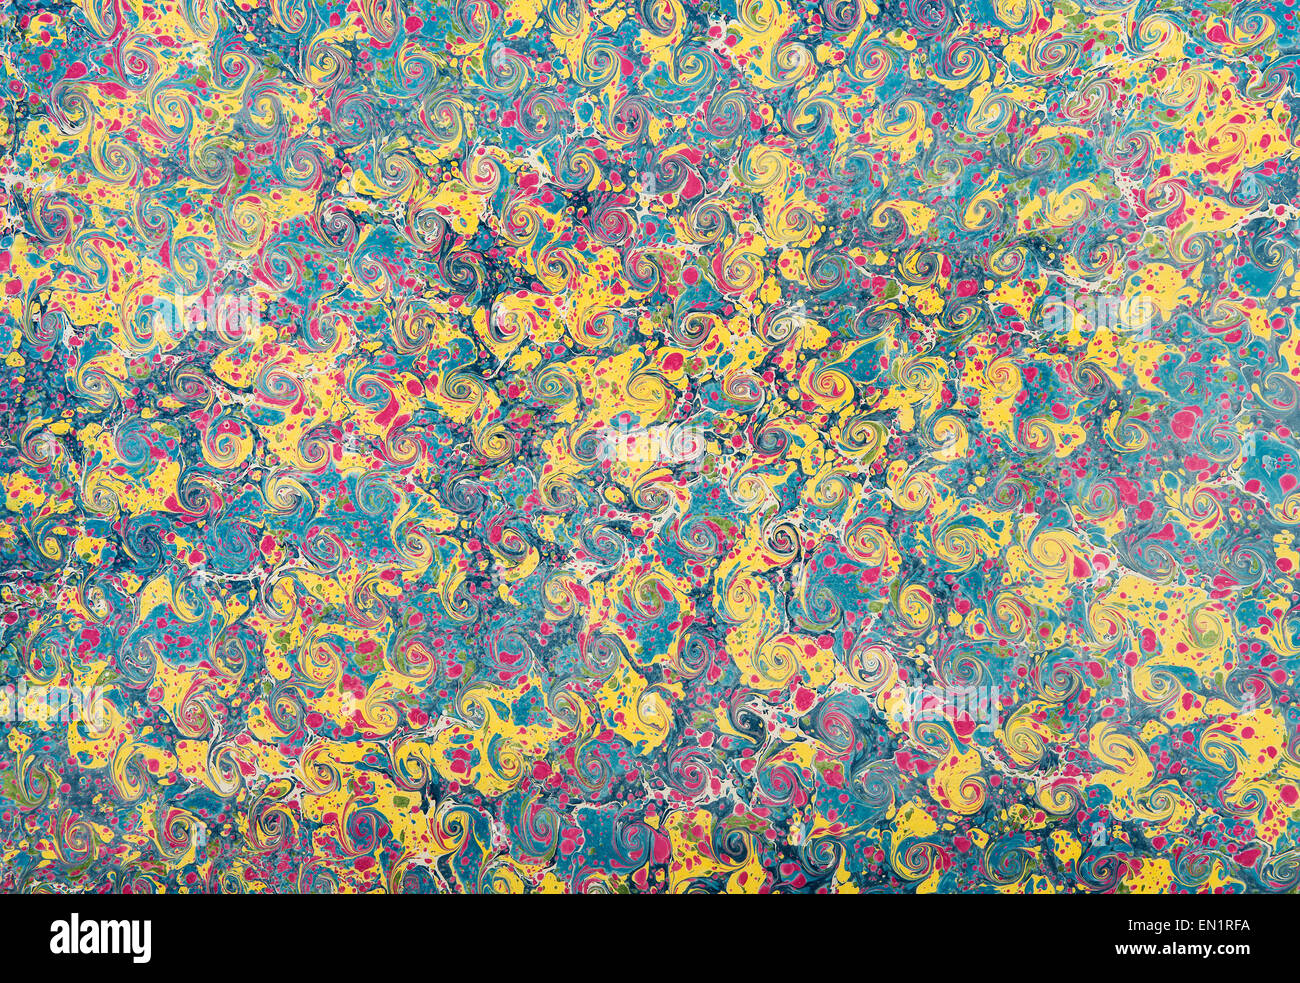 Pretty blue and yellow marble paper design in a full frame background pattern Stock Photo